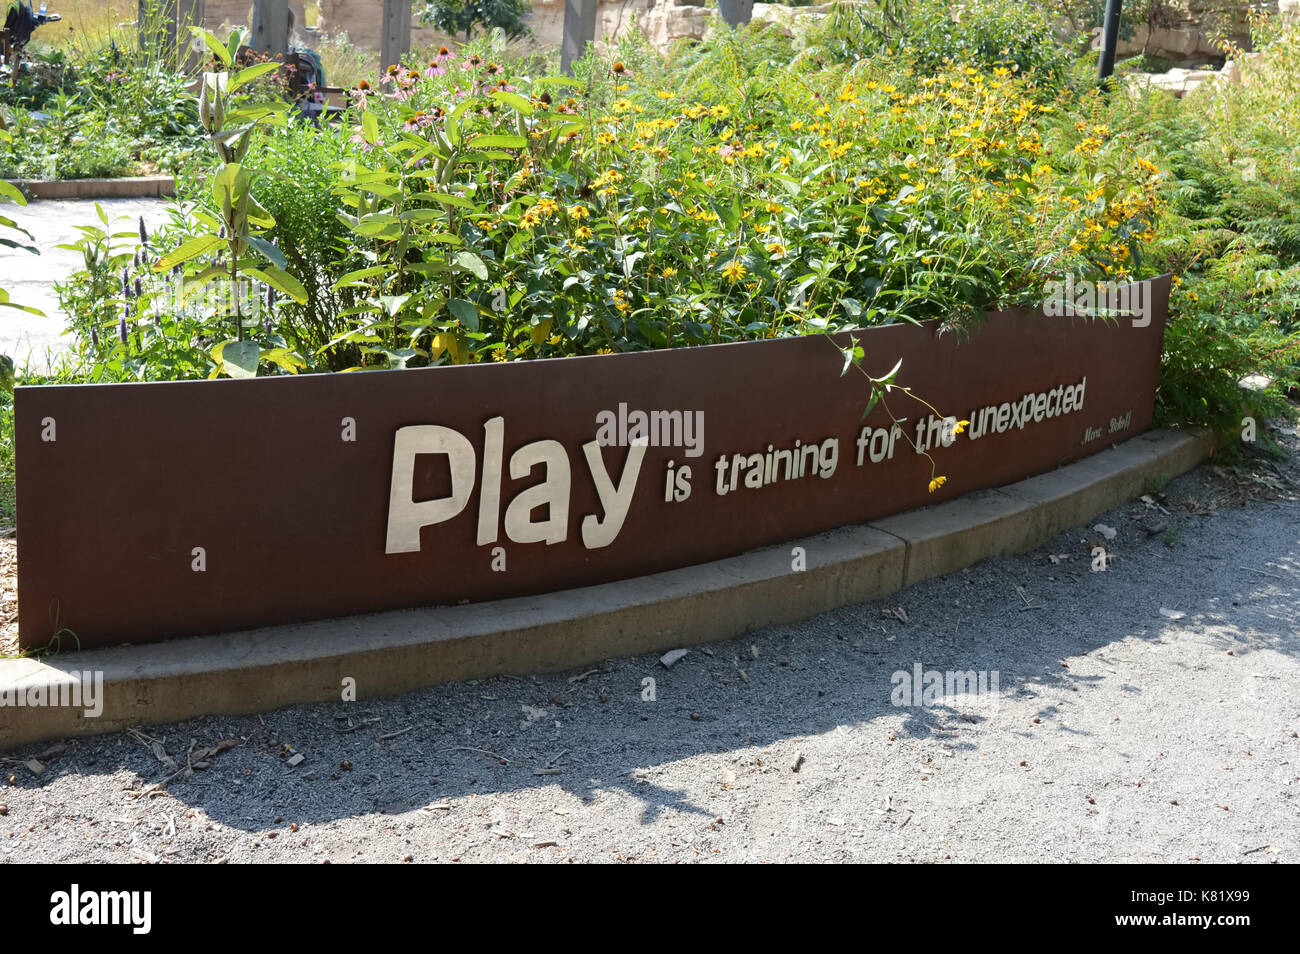 'Play is training for the unexpected' sign in the garden Stock Photo